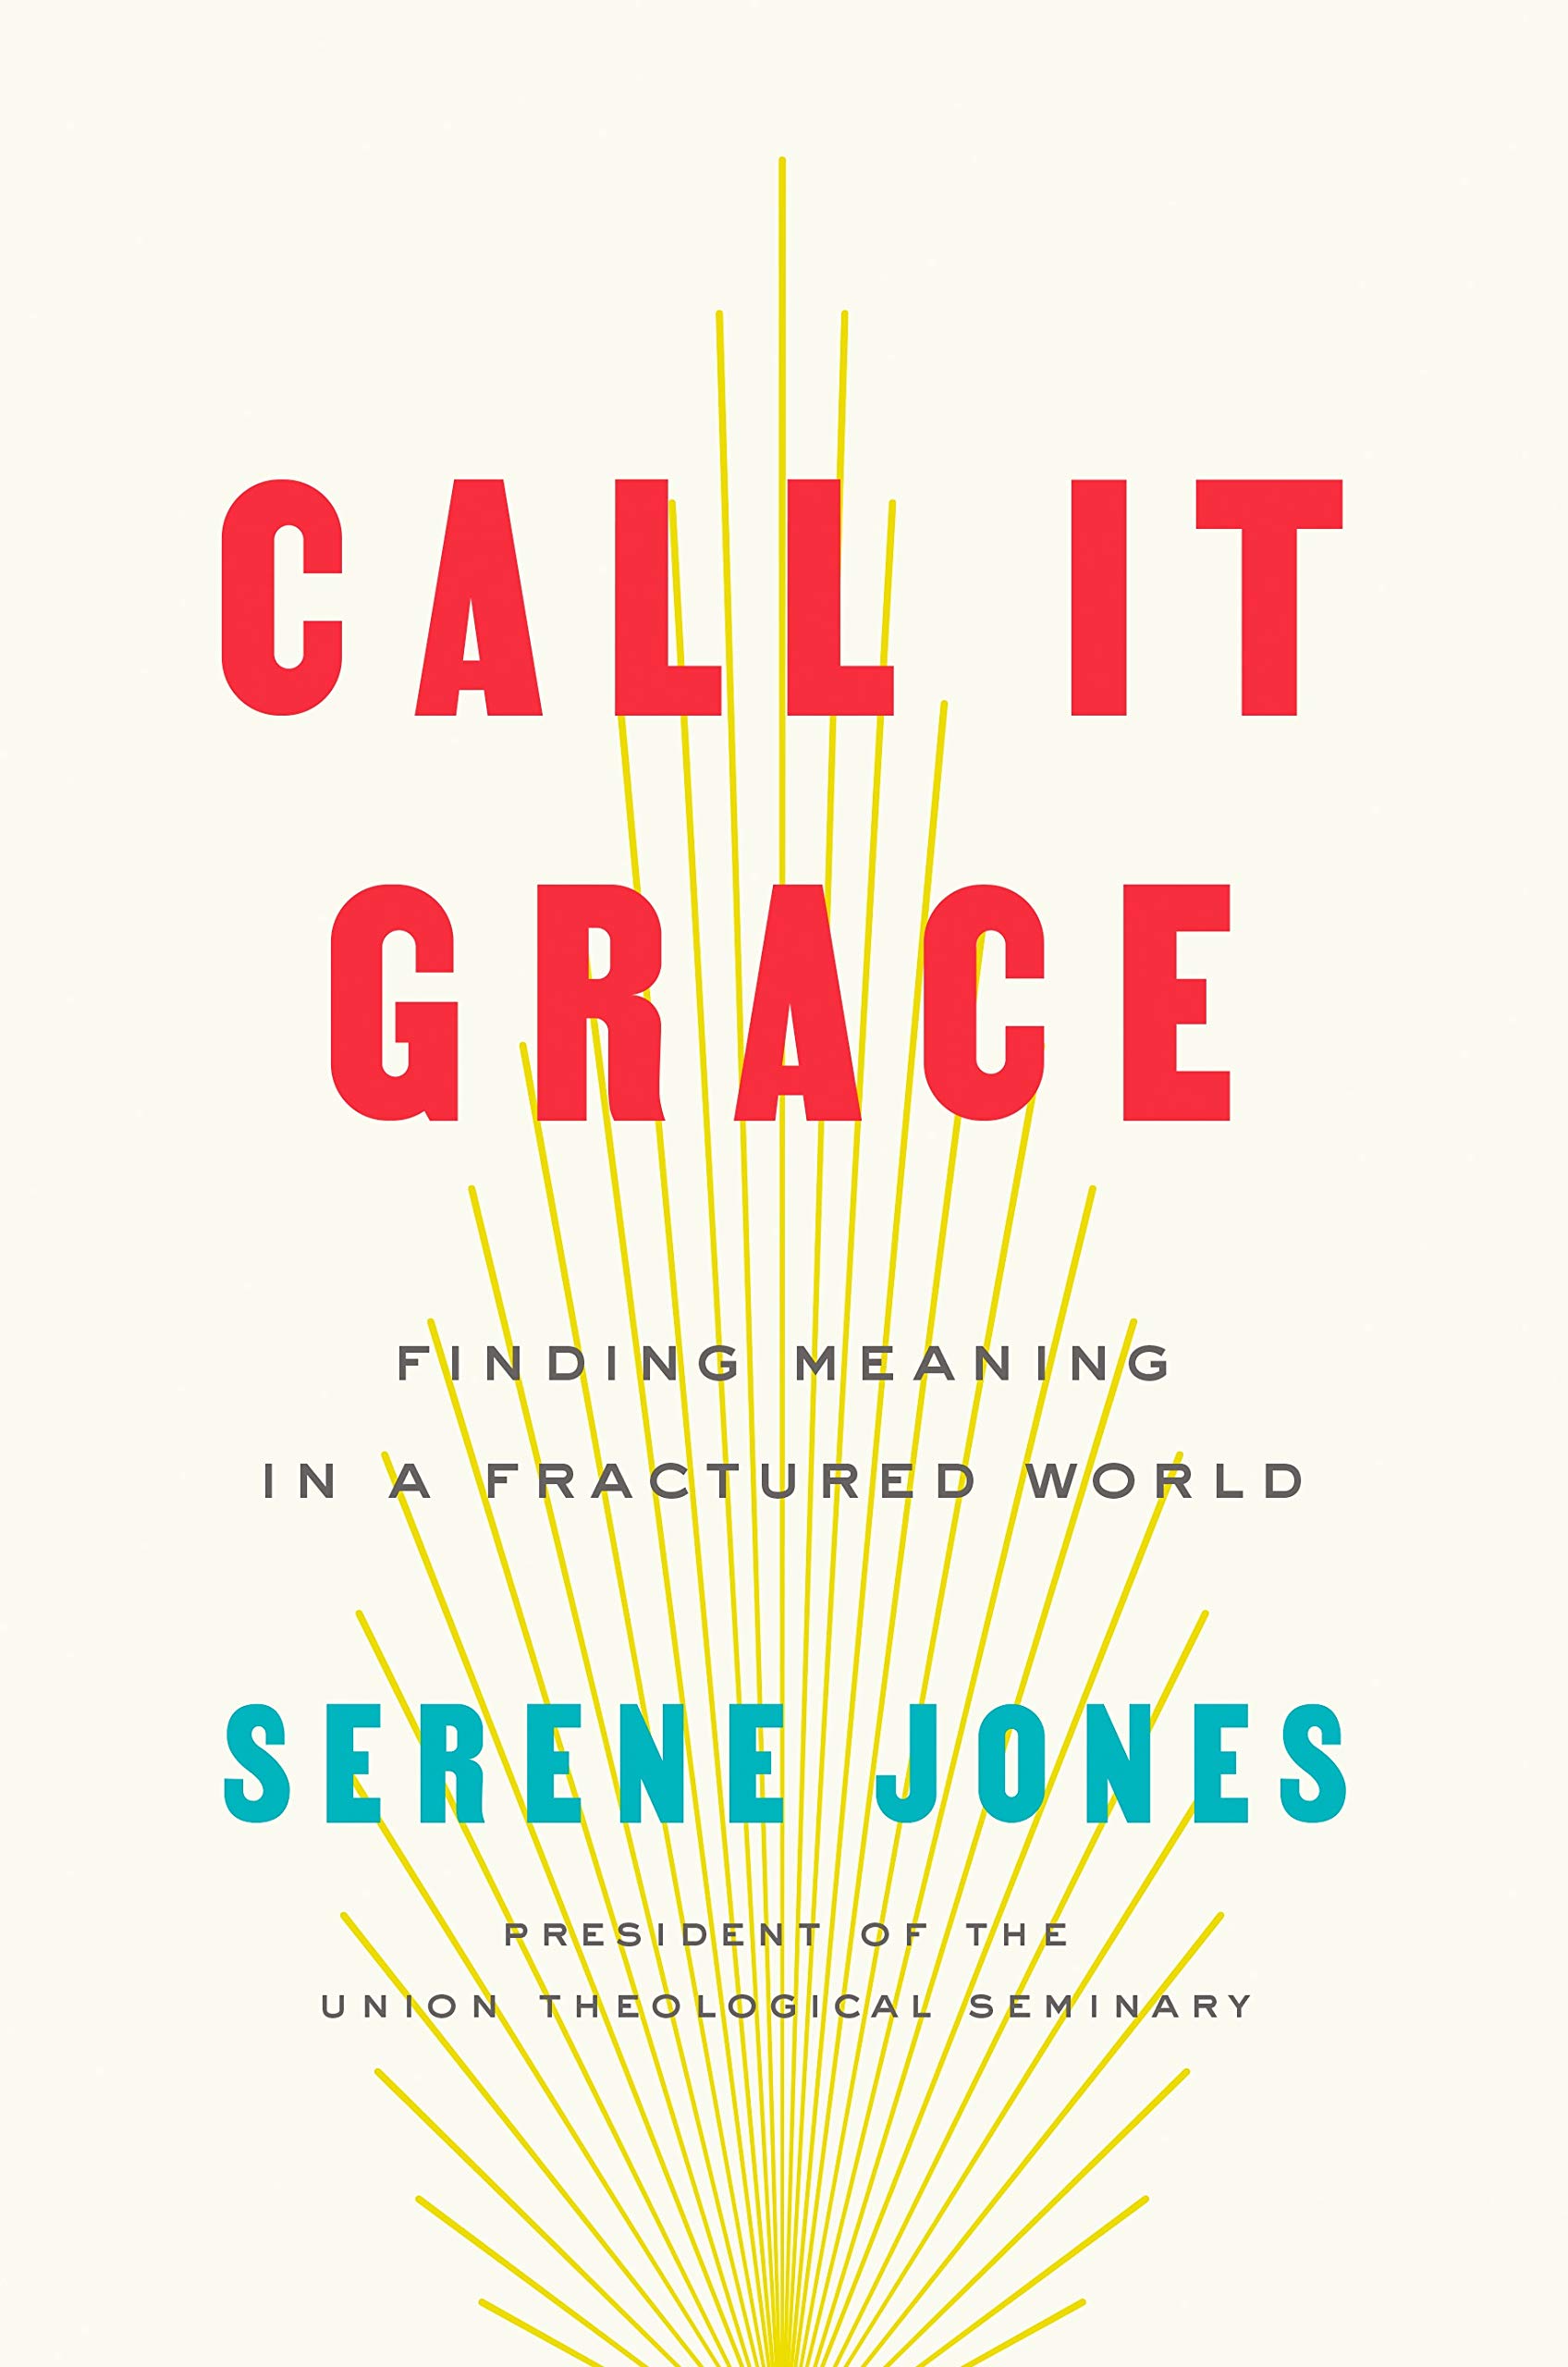 Call it Grace Book Launch & Panel Discussion @ Union Theological Seminary | New York | New York | United States